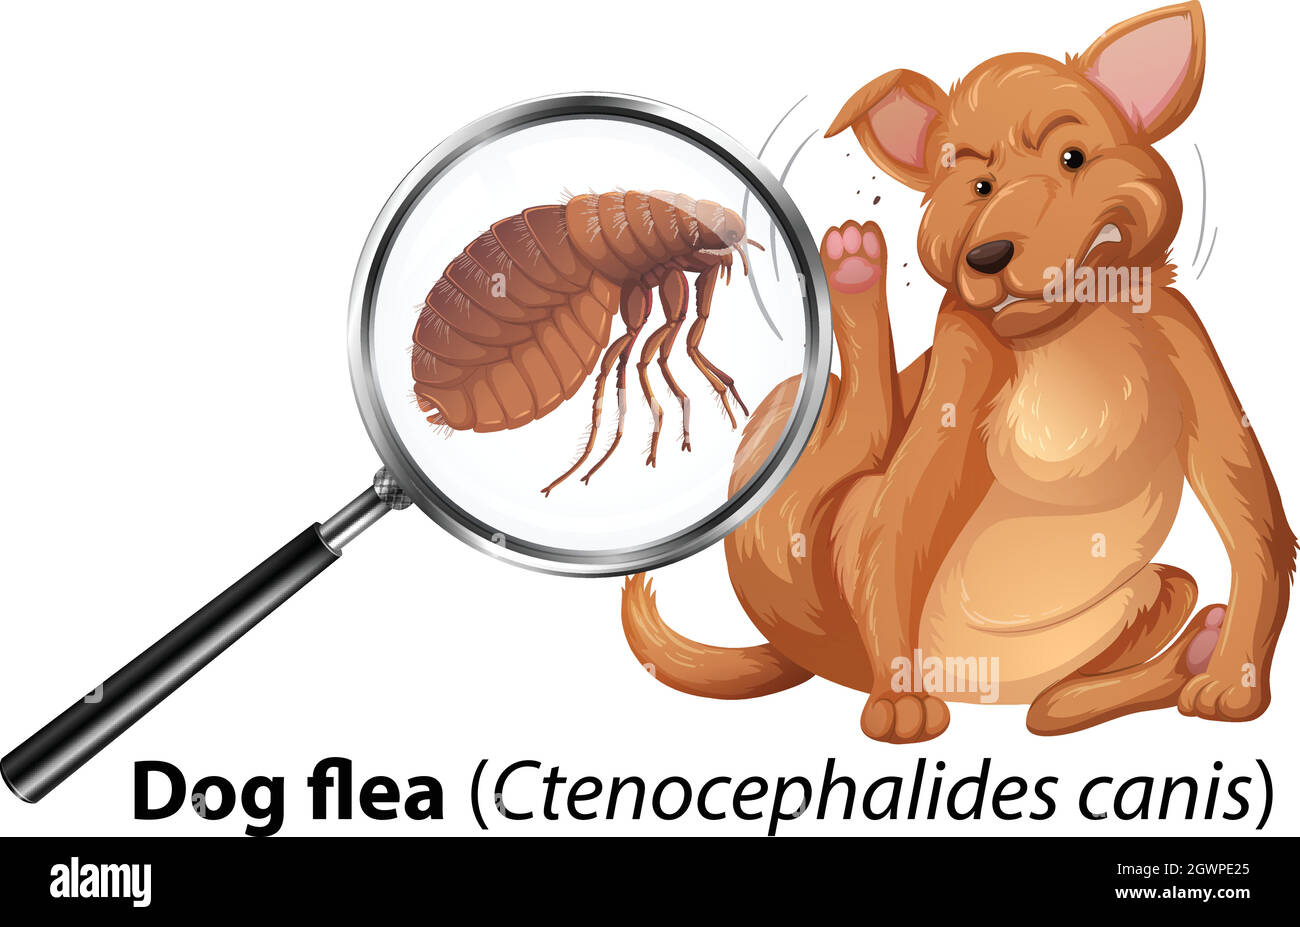 Dog with flea magnified Stock Vector